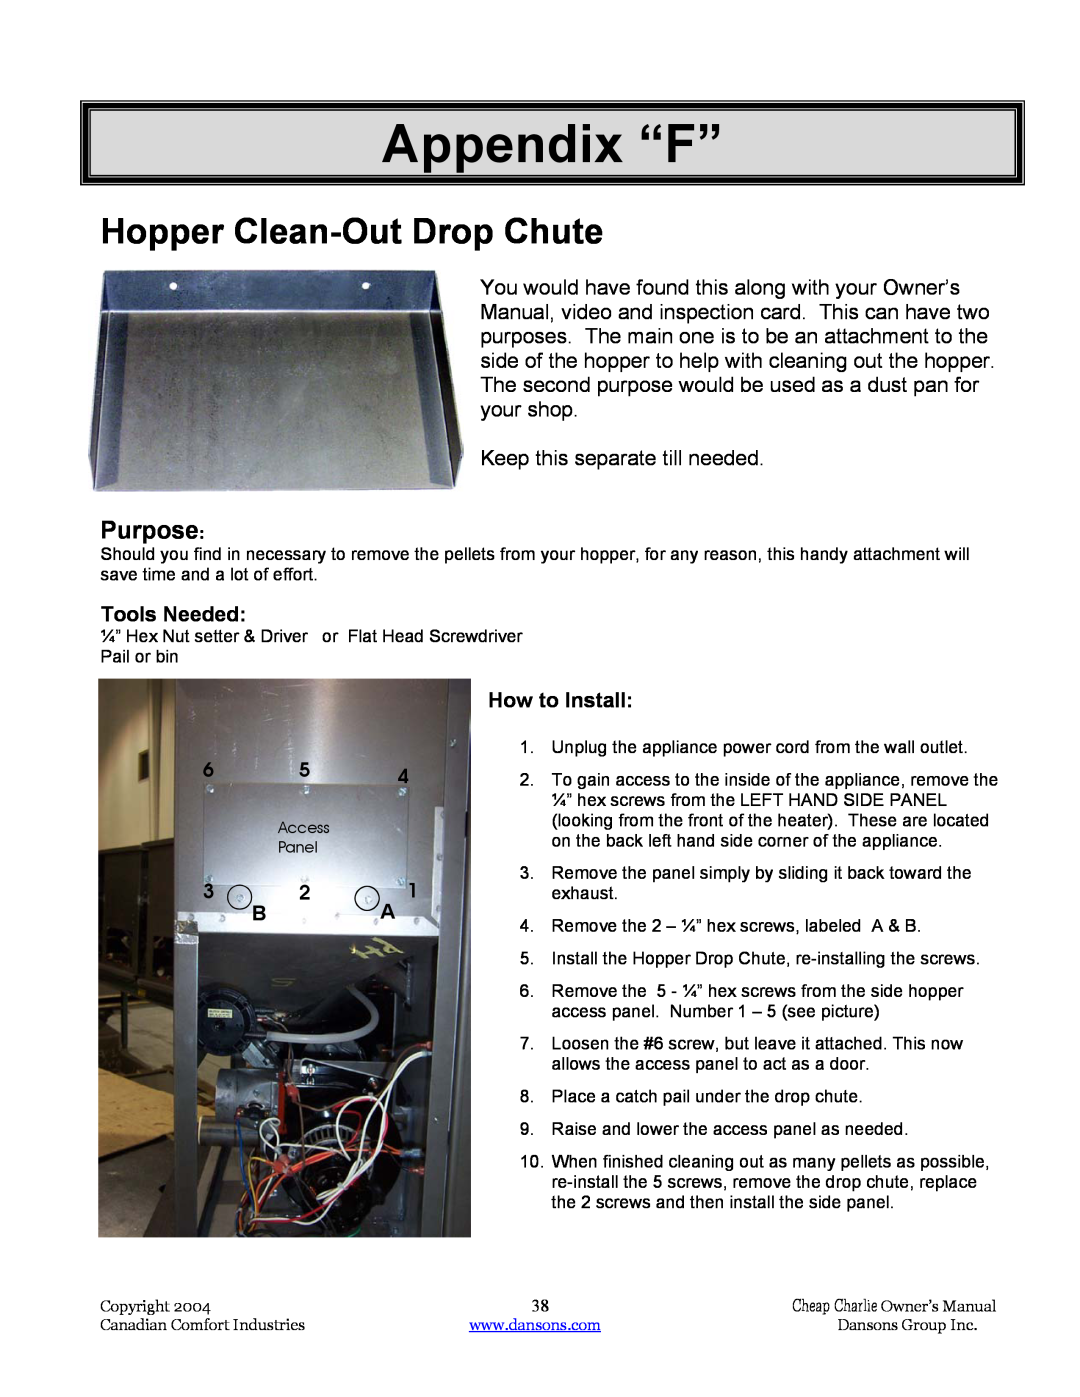 Dansons Group HCF300, HCF120, HCS, HCJ manual Appendix “F”, Hopper Clean-OutDrop Chute, Purpose, Tools Needed, How to Install 